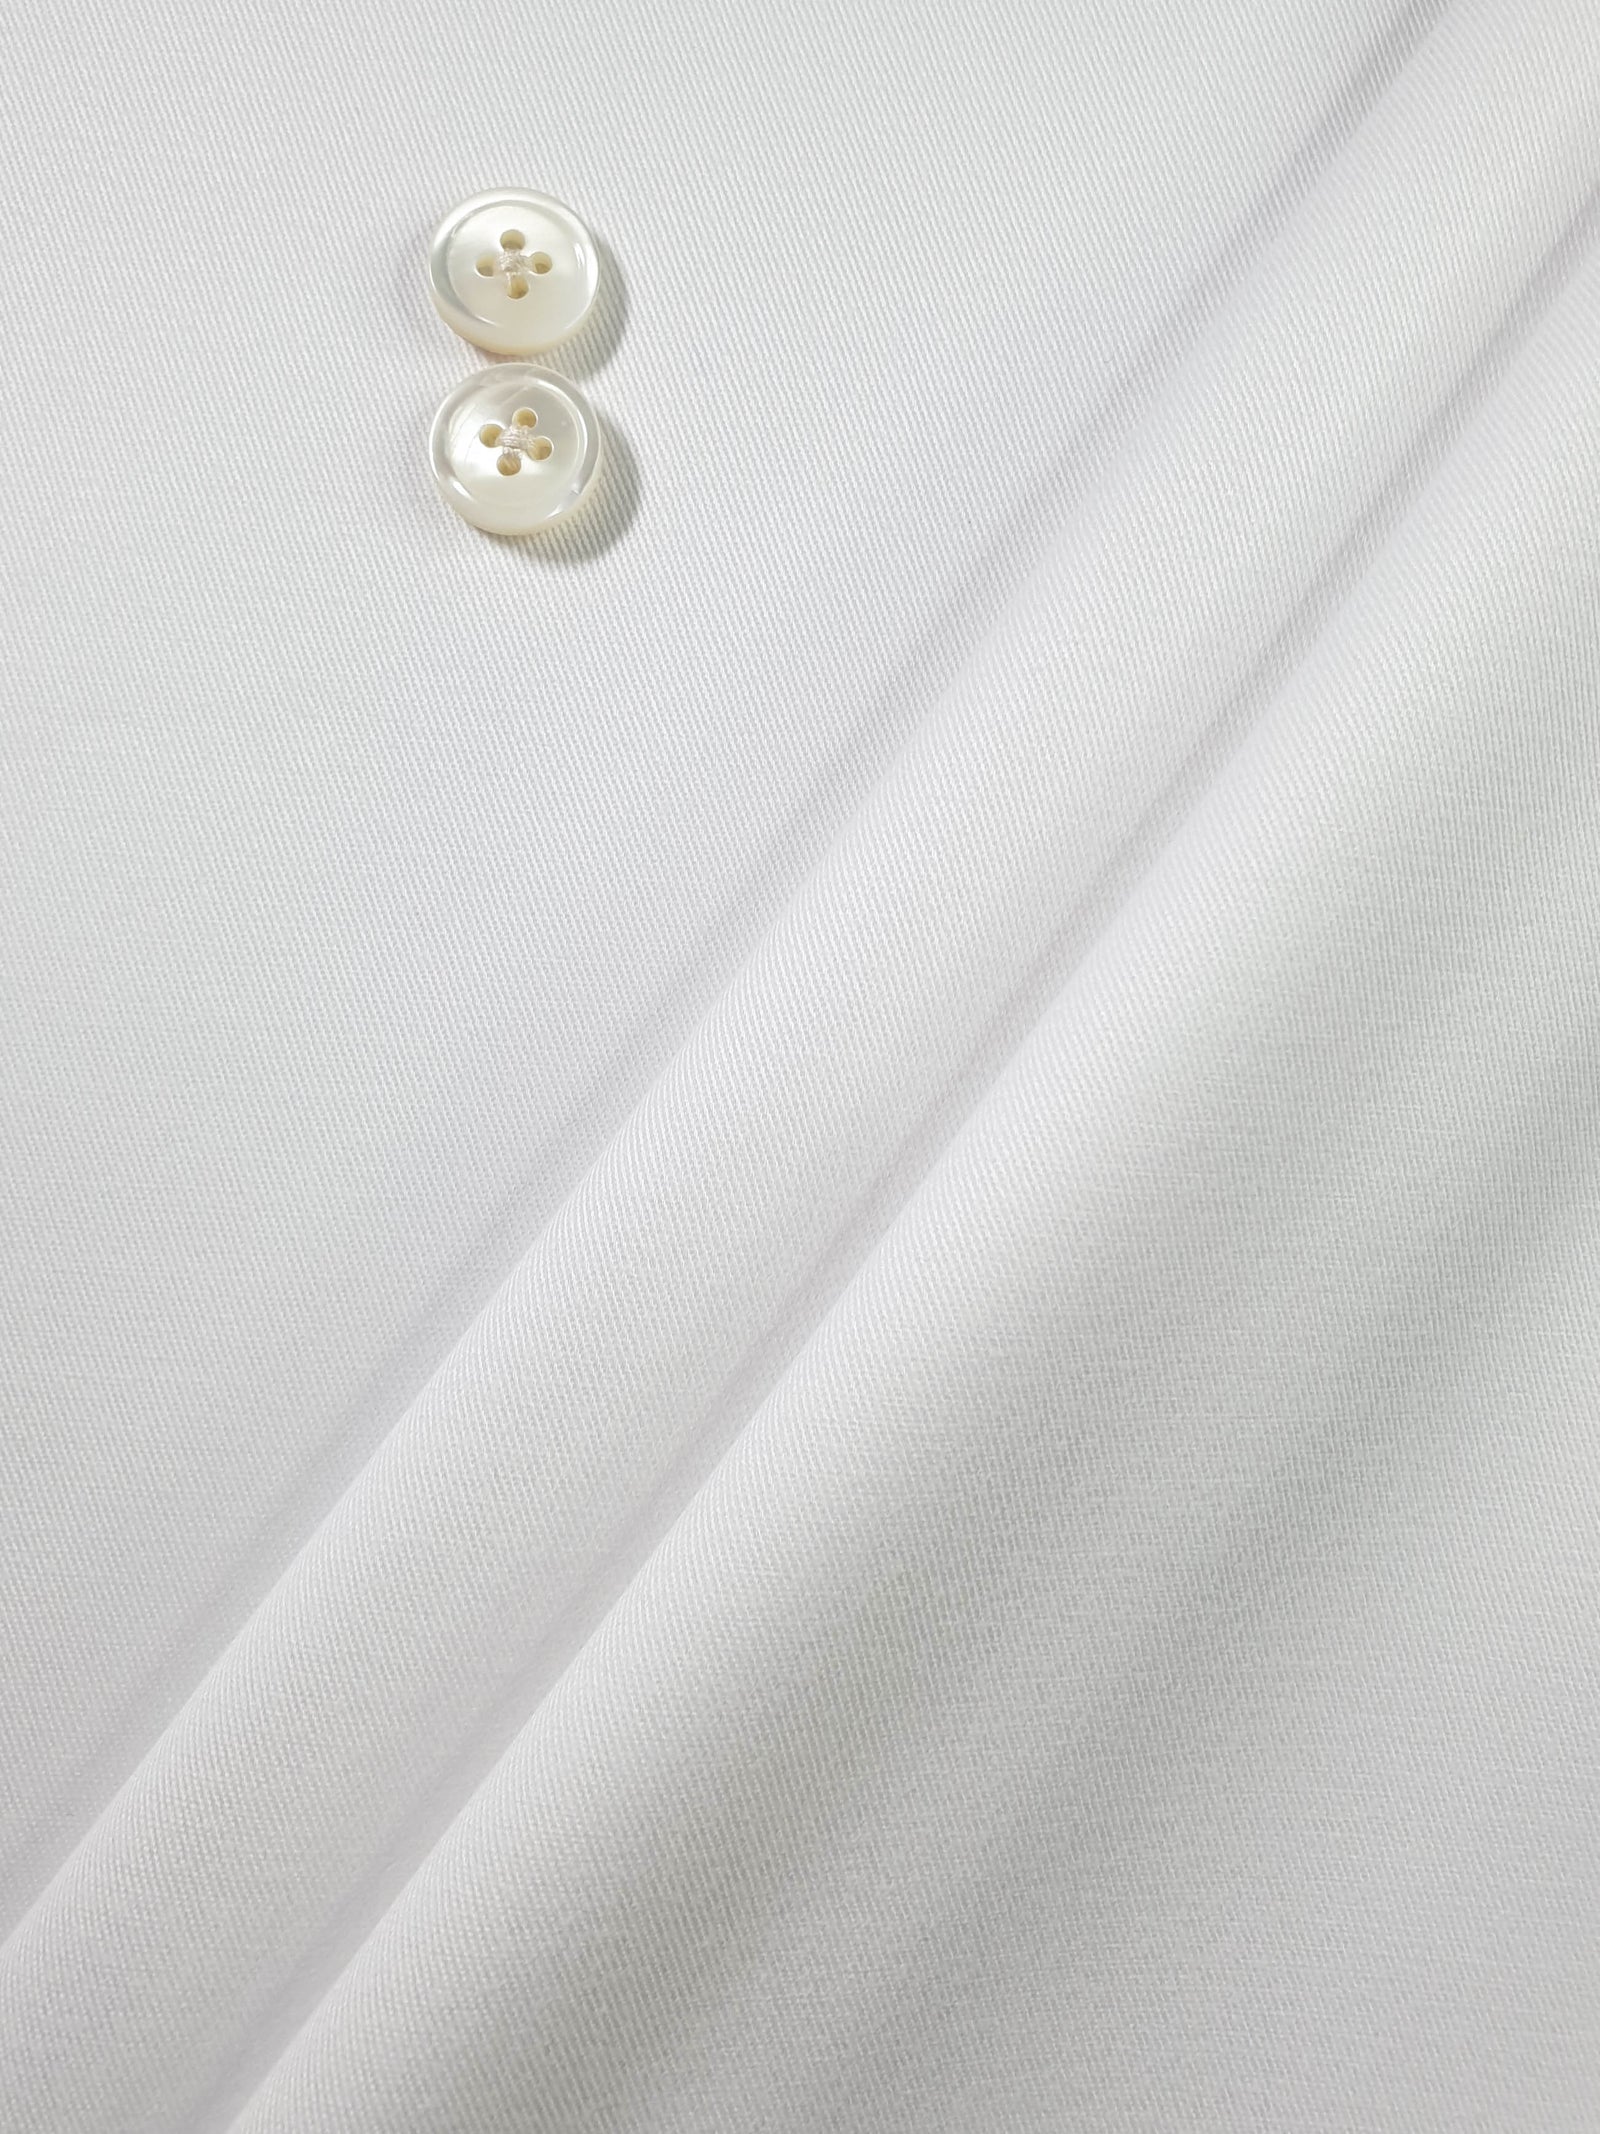 HUBERROSS White Color Brushed Cotton Twill with Stretch  97% Cotton 3% Lycra Cloth Made in Italy